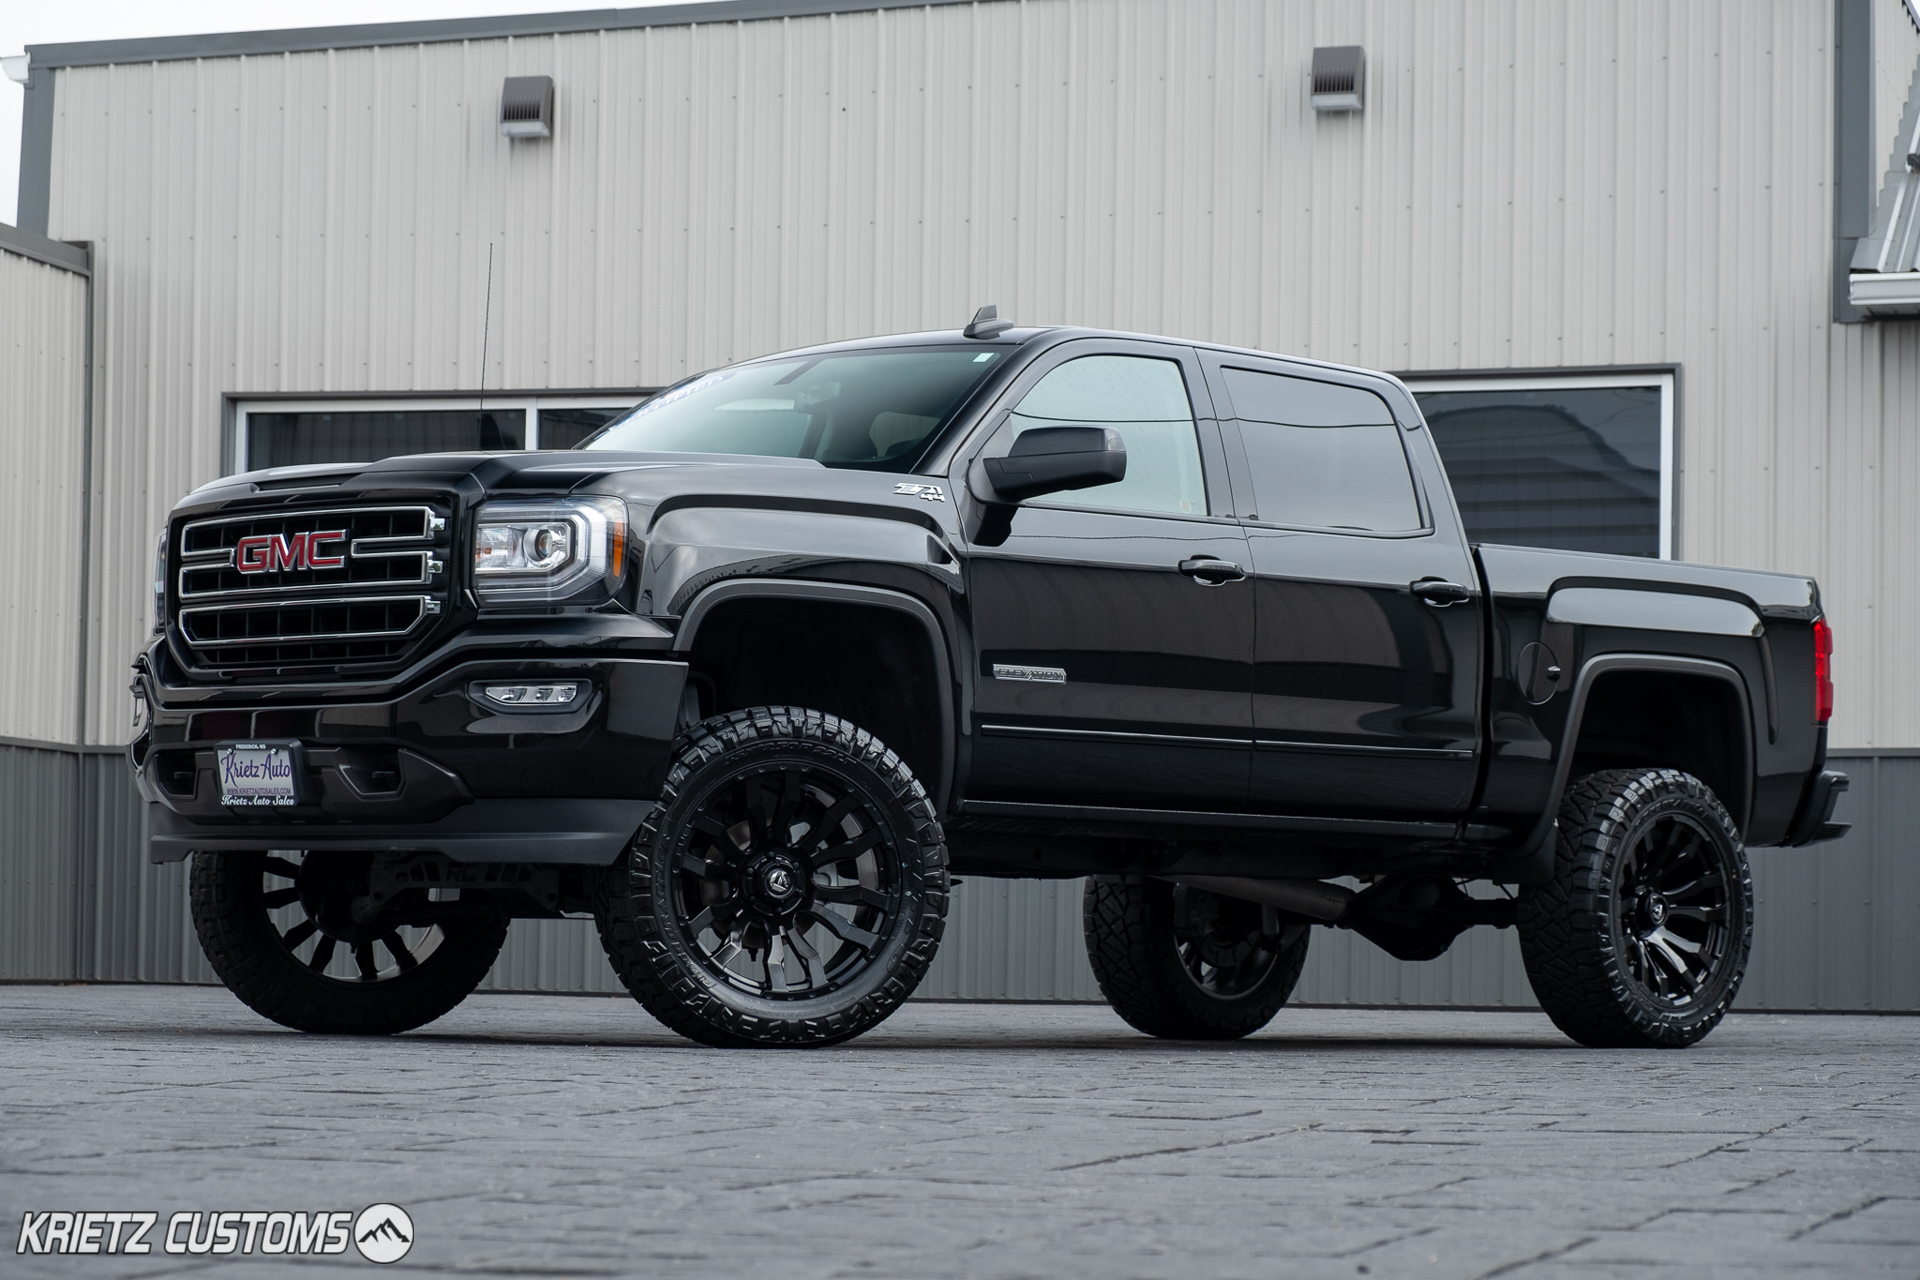 Lifted 2018 GMC Sierra 1500 with 22×10 Fuel Blitz Wheels and 7 Inch Rough Country Suspension Lift Kit For 2018 Gmc 1500 Denali